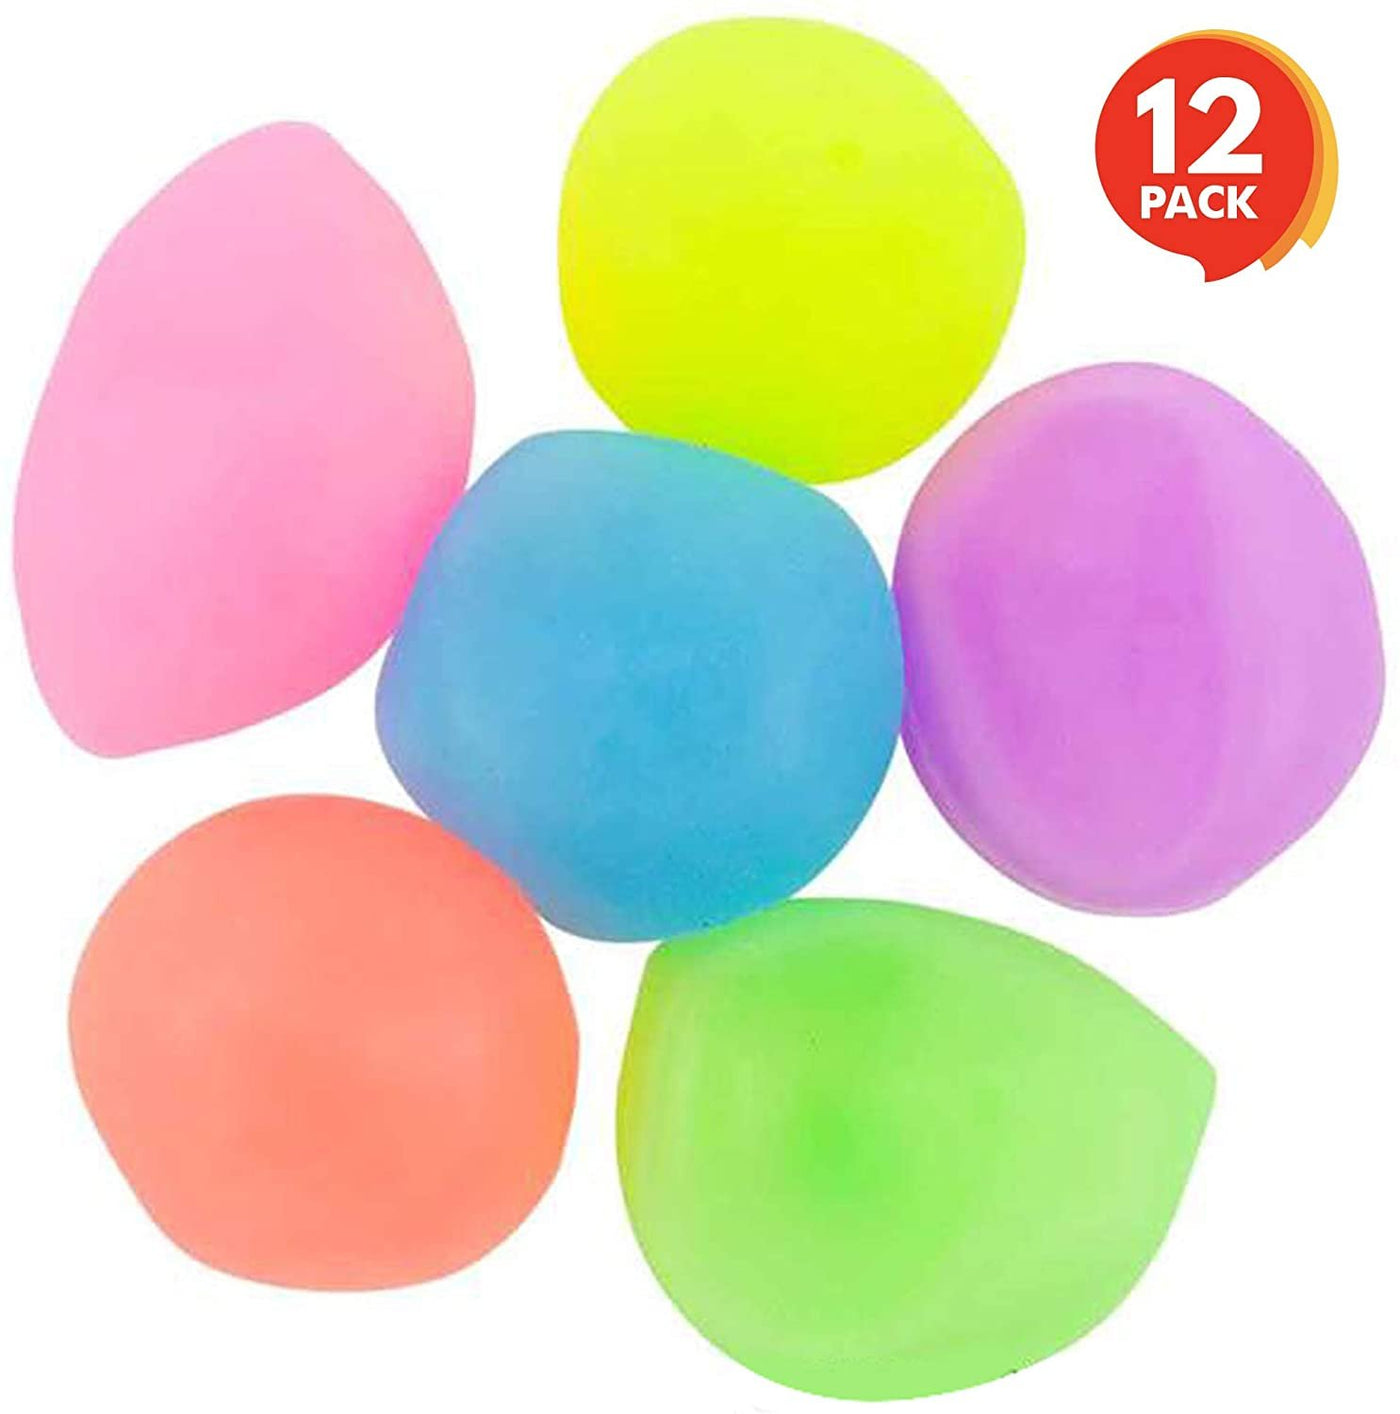 Jelly Balloon Ball Set - 12 Piece - Fun Balloon Balls That Bounce and Stretch - Punch Balloons - Inflation Nozzles Included - Party Favor for Kids, Gift Idea for Boys, Girls - 6 Colors